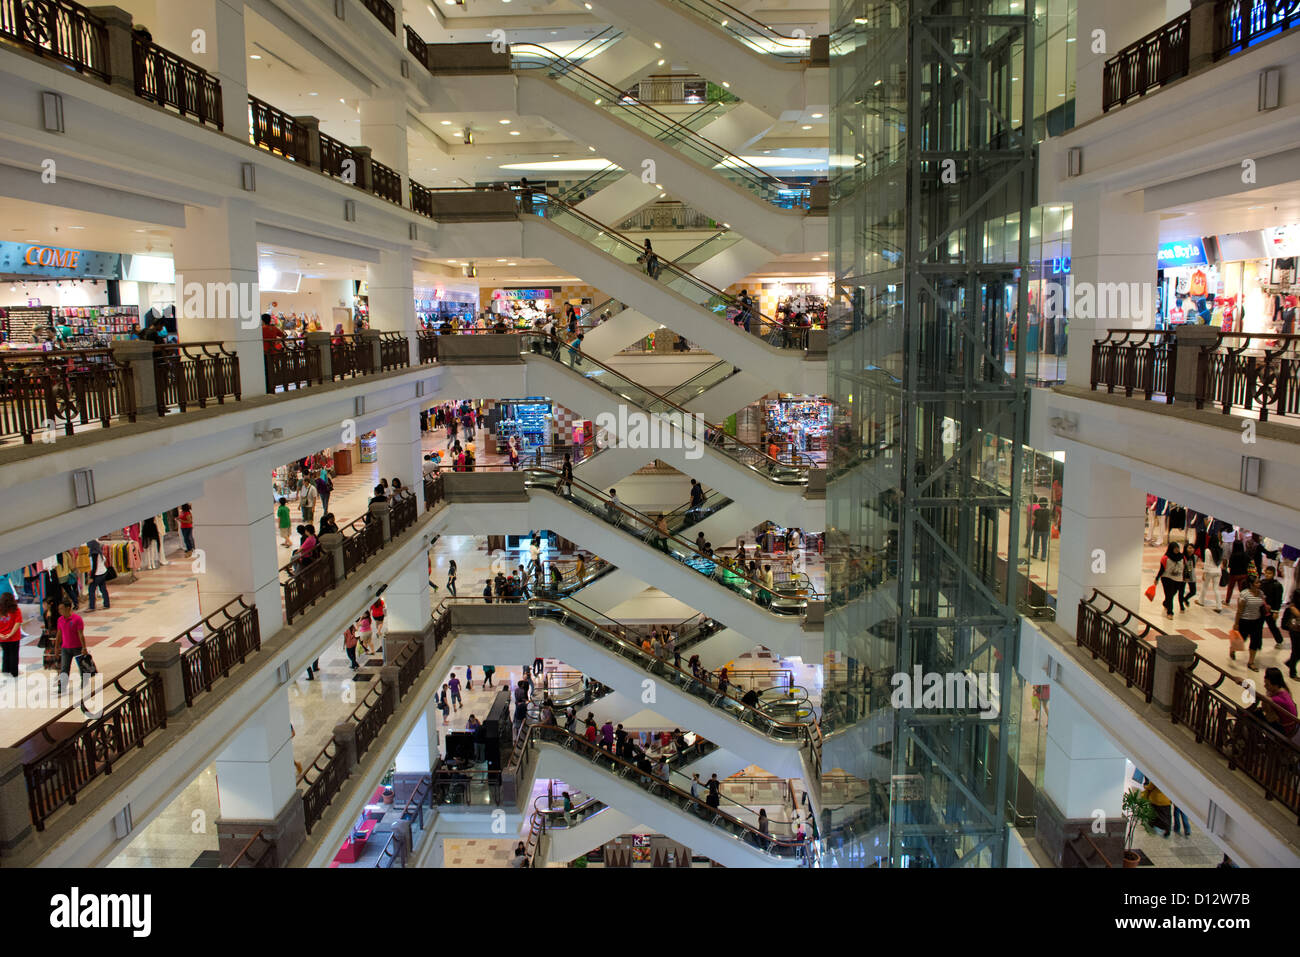 Berjaya Times Square shopping center is pictured n in Kuala Lumpur, Malaysia, 3 November 2012. Opened in 2003, it is one of the world's biggest malls. Photo: Soeren Stache Stock Photo